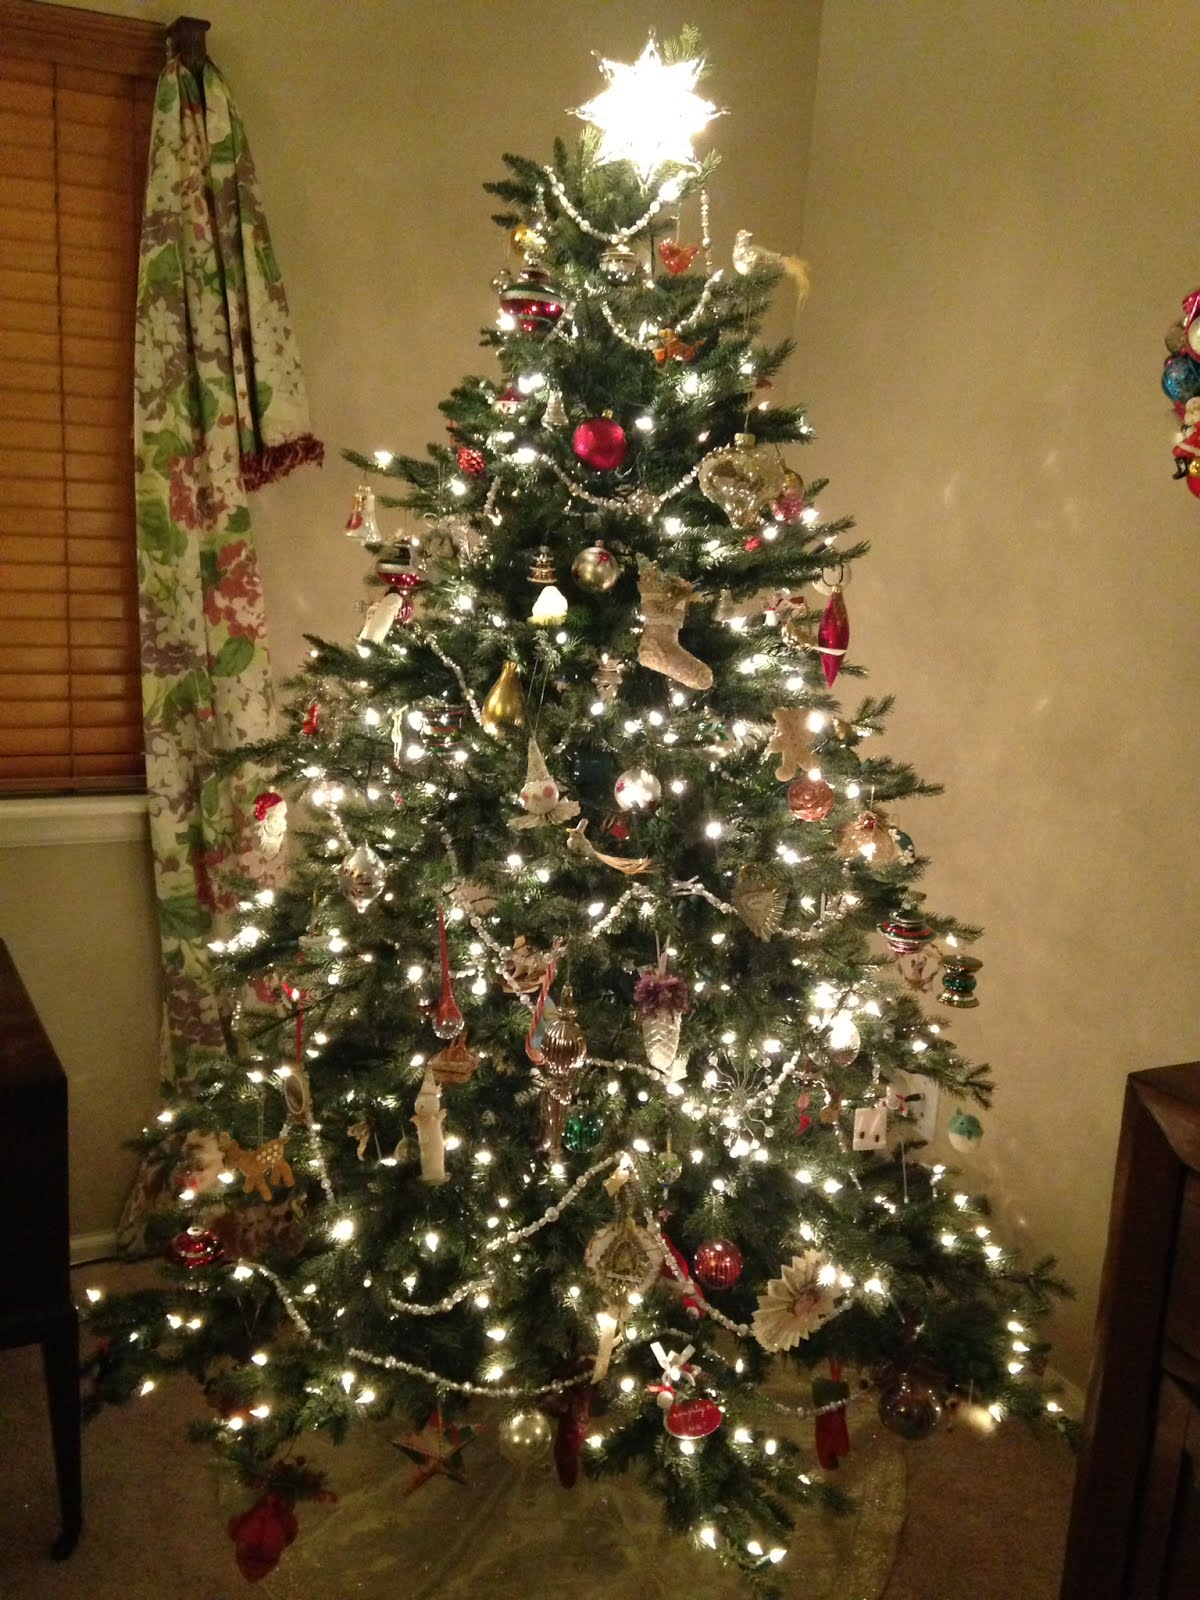 The tree is up!